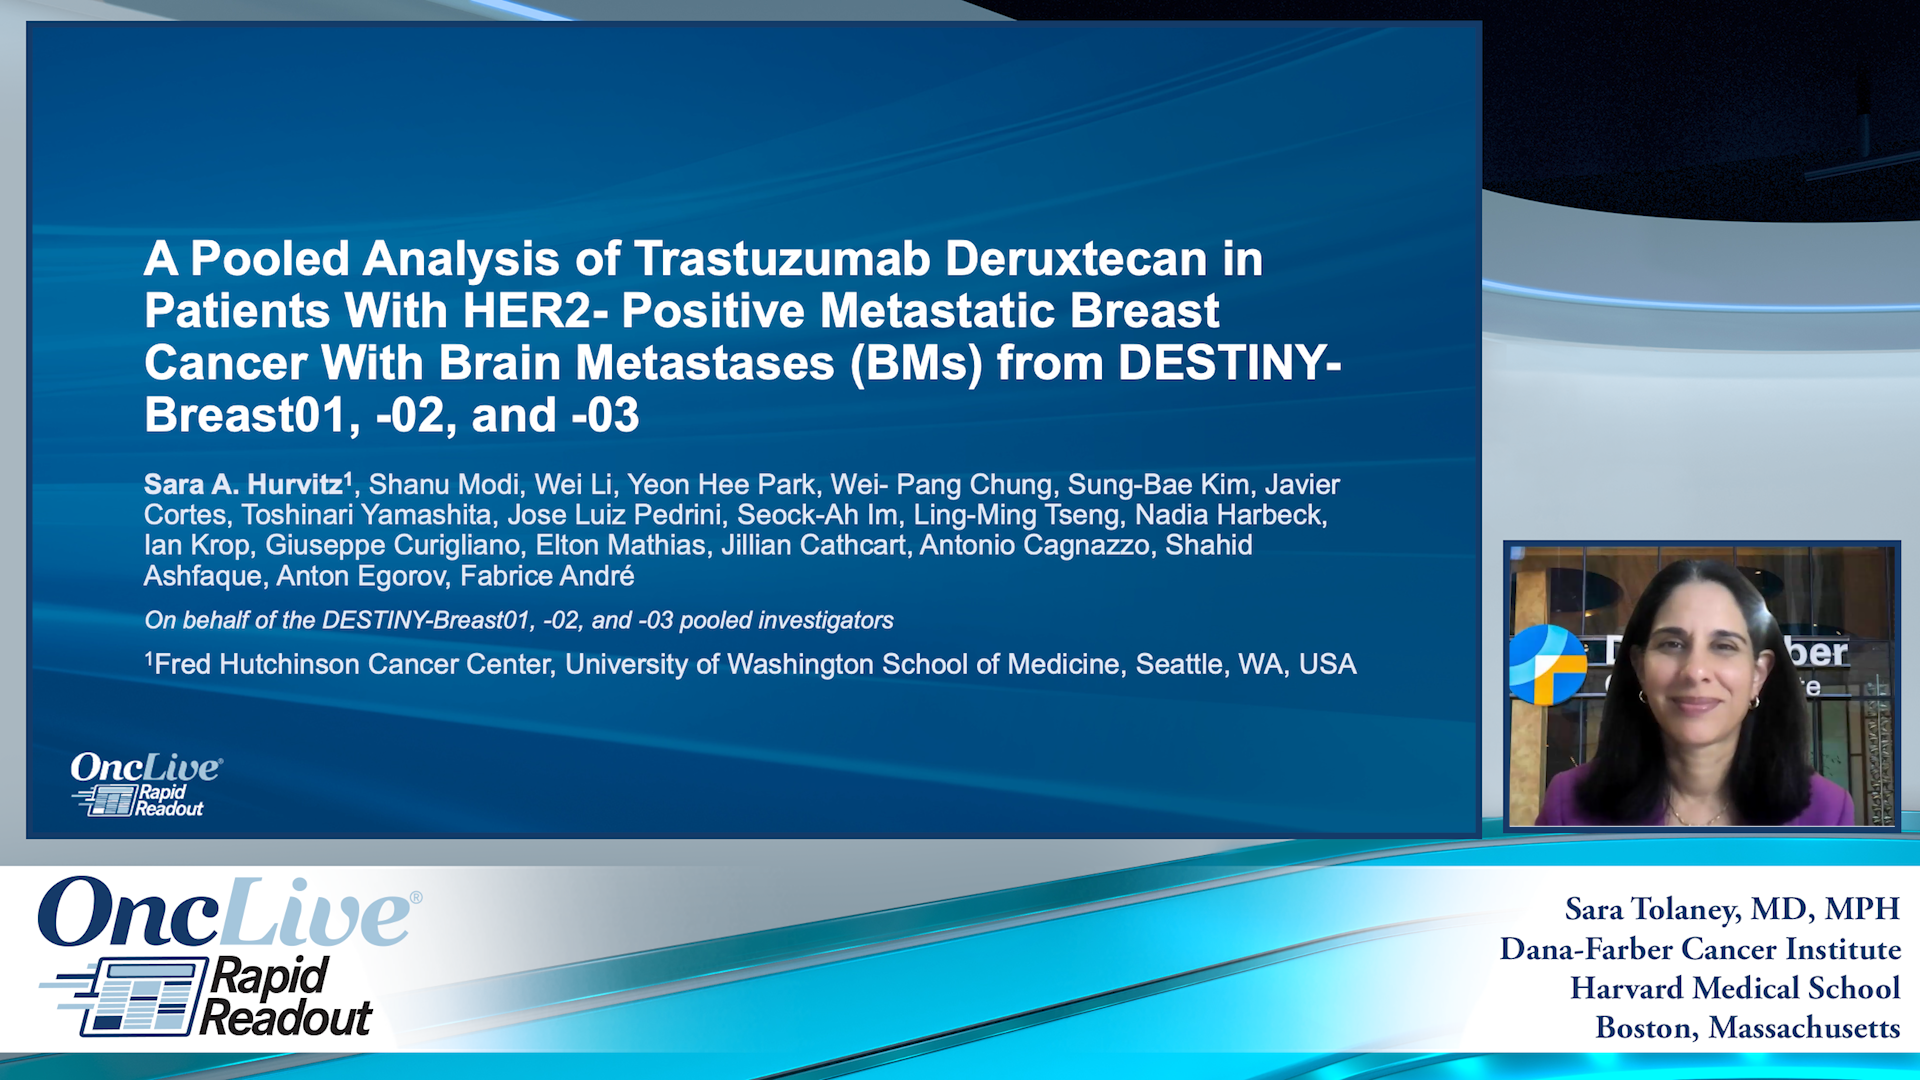 A Pooled Analysis of Trastuzumab Deruxtecan in Patients With HER2- Positive Metastatic Breast Cancer With Brain Metastases (BMs) from DESTINY-Breast01, -02, and -03